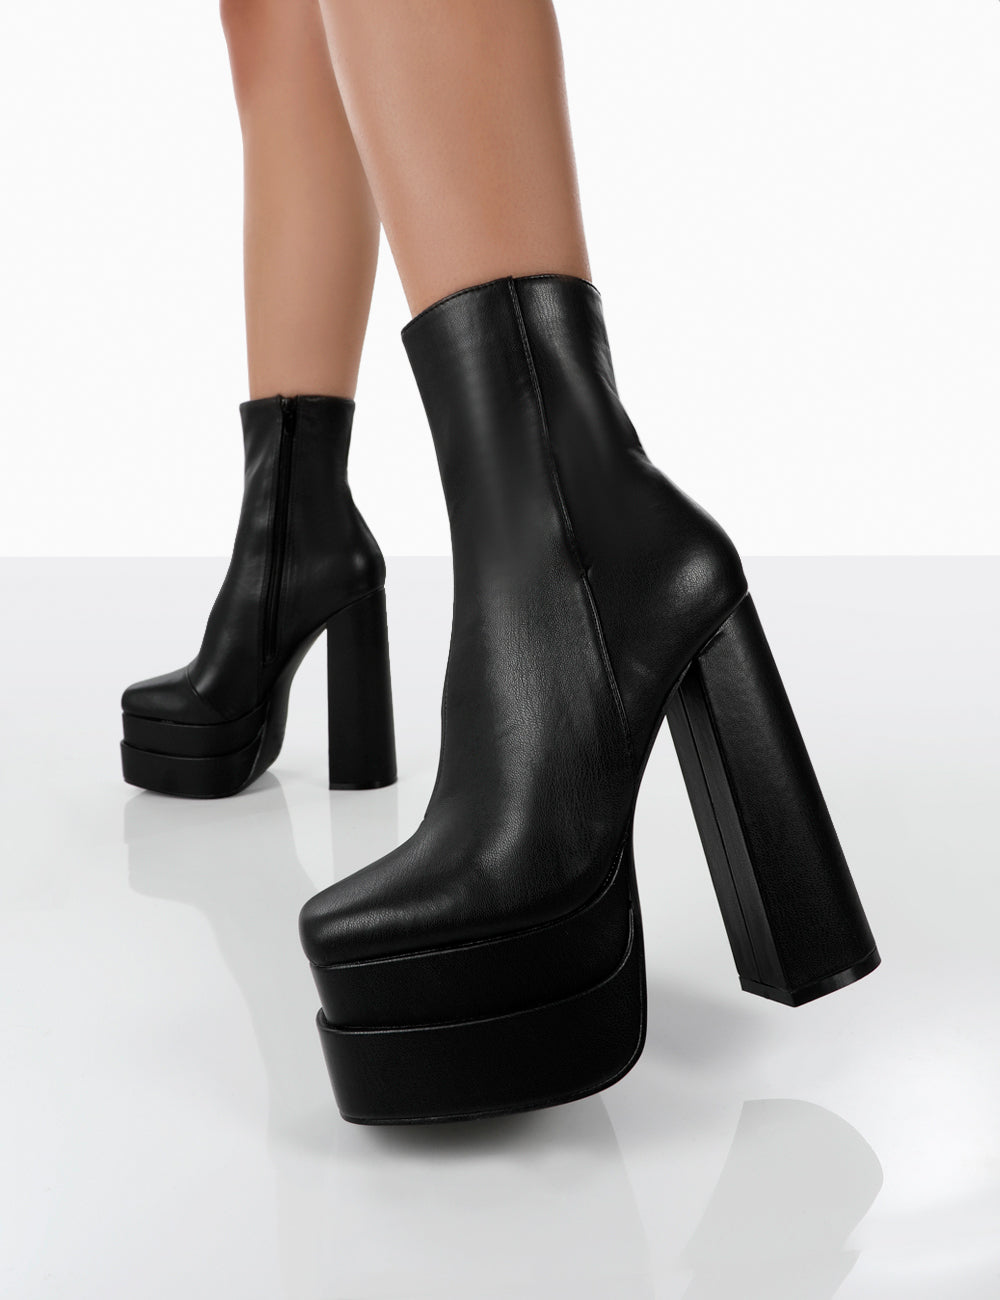 Heels Dance Shoes Booties Boots | Bouge Moi Dance Shoes – Bouge Moi Shoes